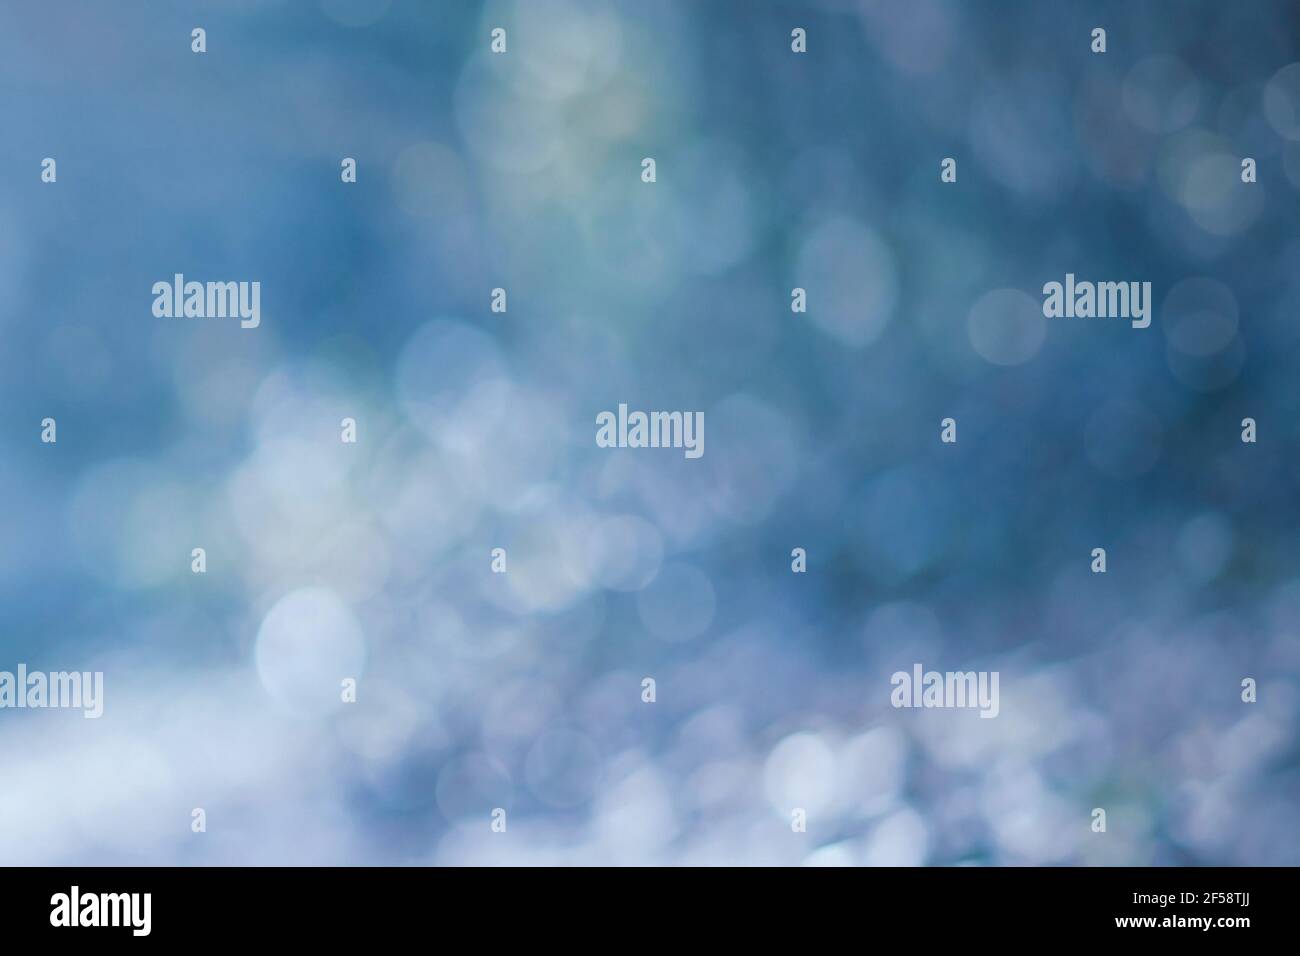 Abstract bokeh blur background with cold blue colors Stock Photo - Alamy